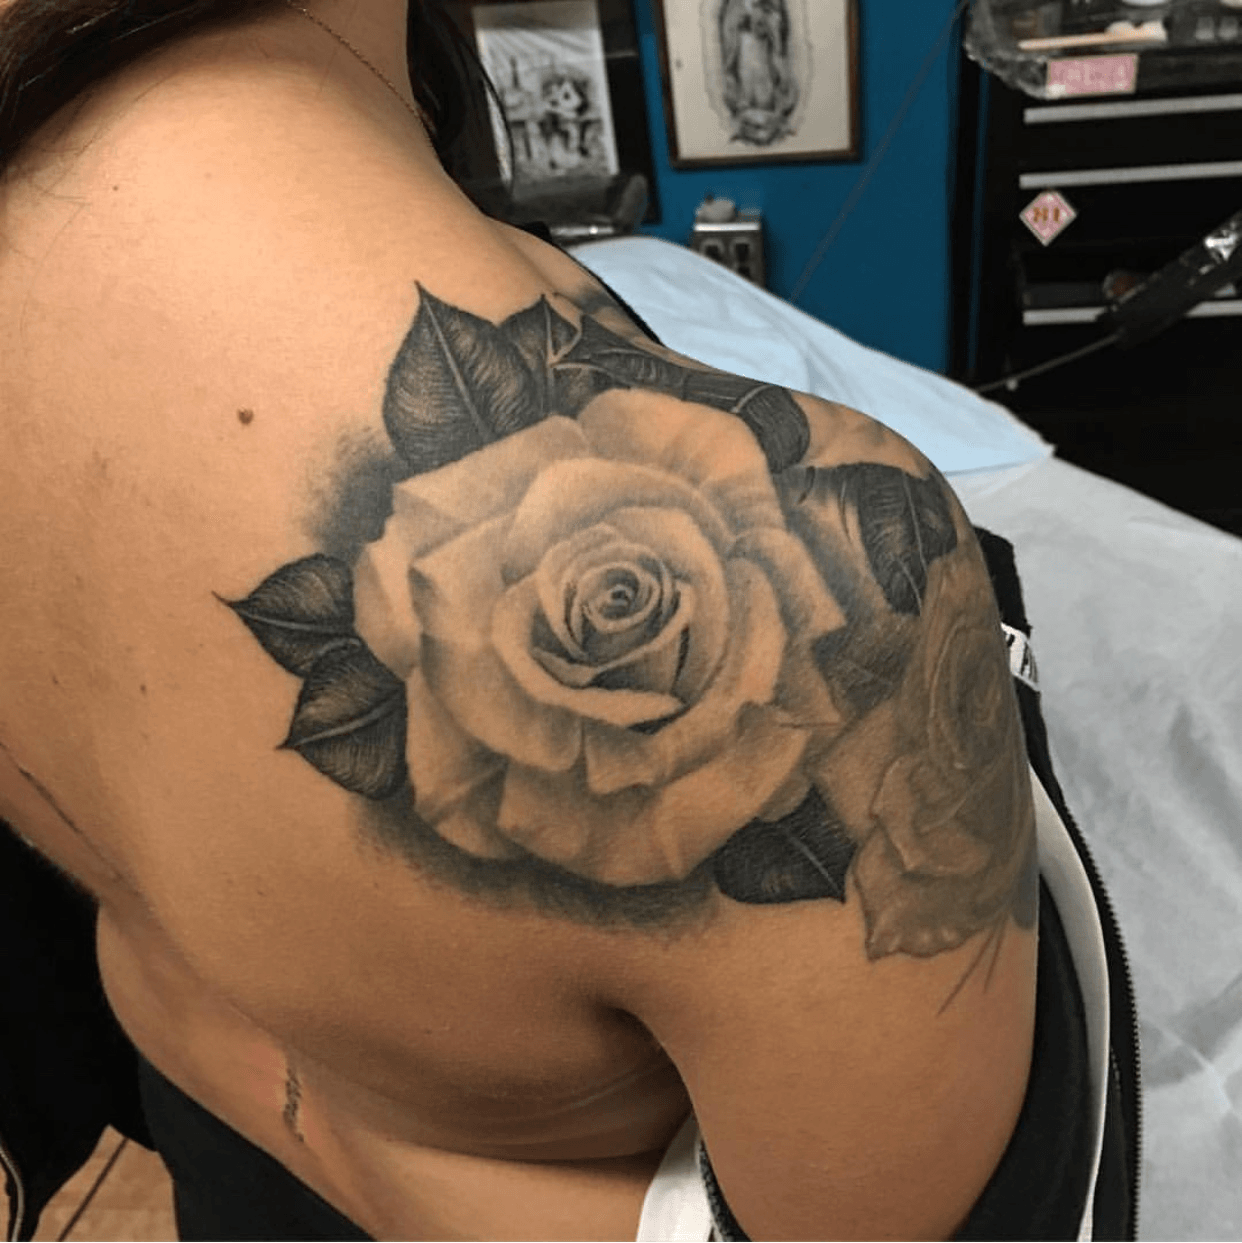 La Santa Maria Tattoo  Art  Örebro  Chicano Rose Tattoo done by  elbricenio  What kind of flower would you like to wear on your skin   Let us know 